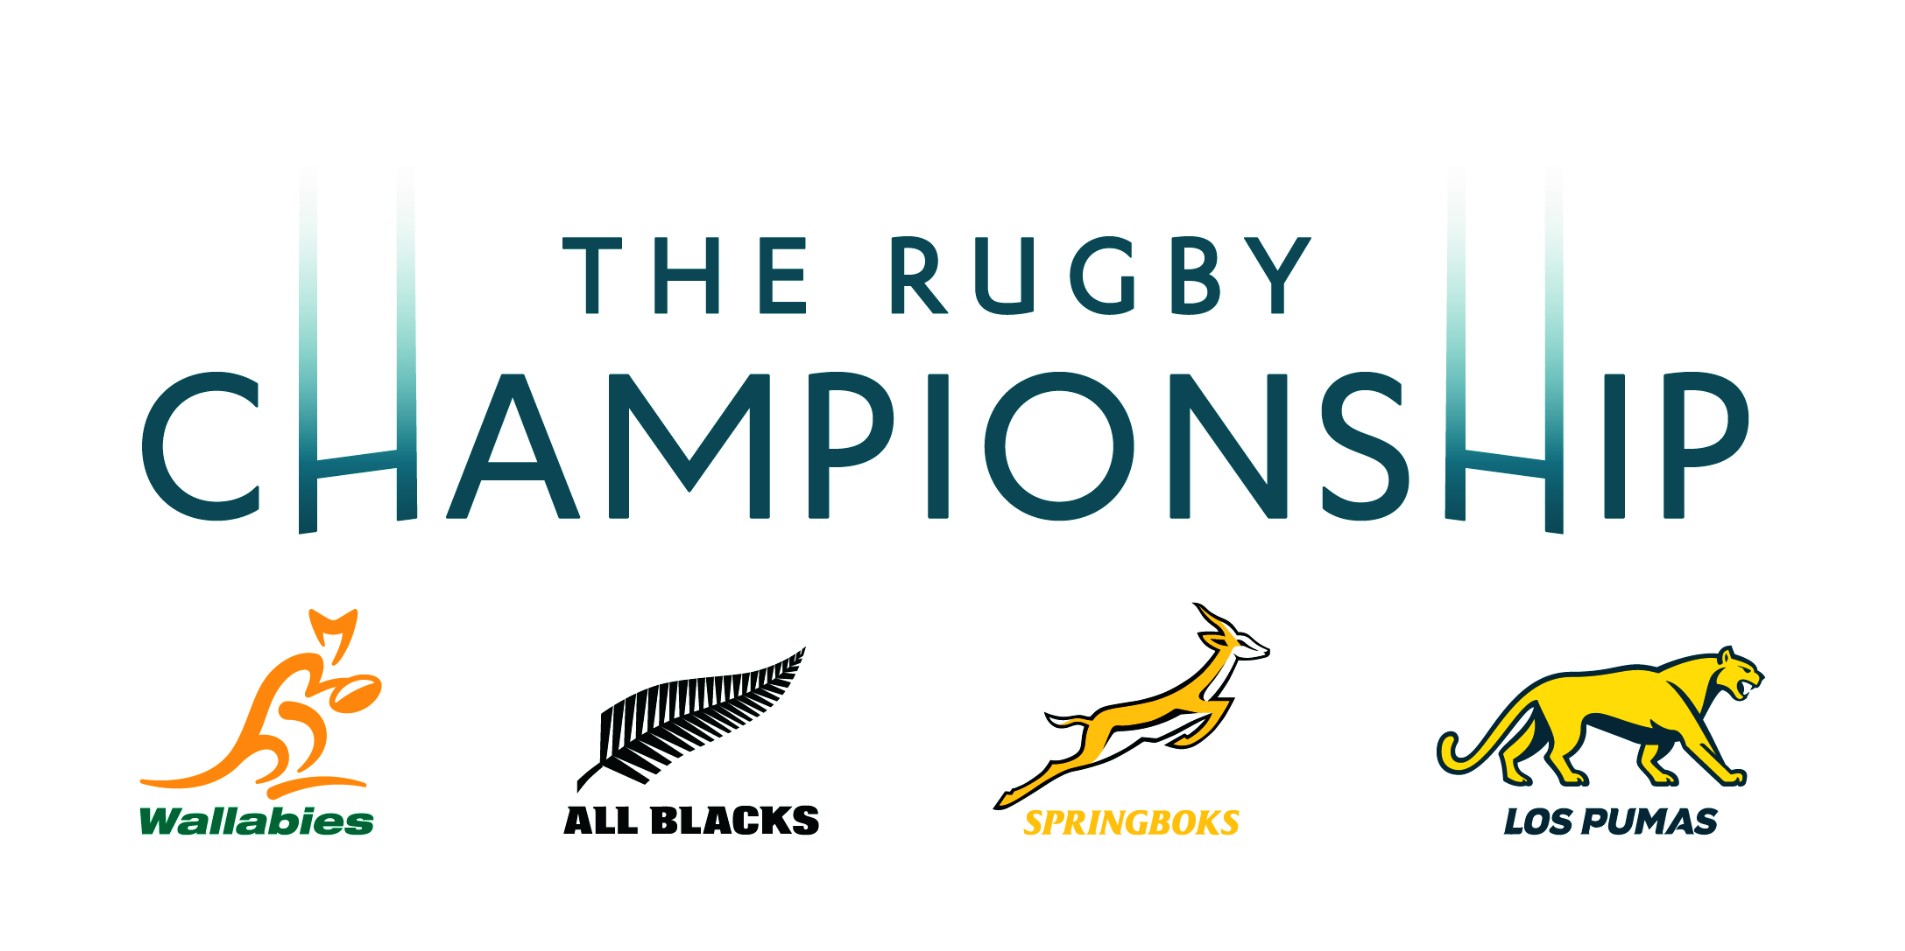 Rugby Championship 2023